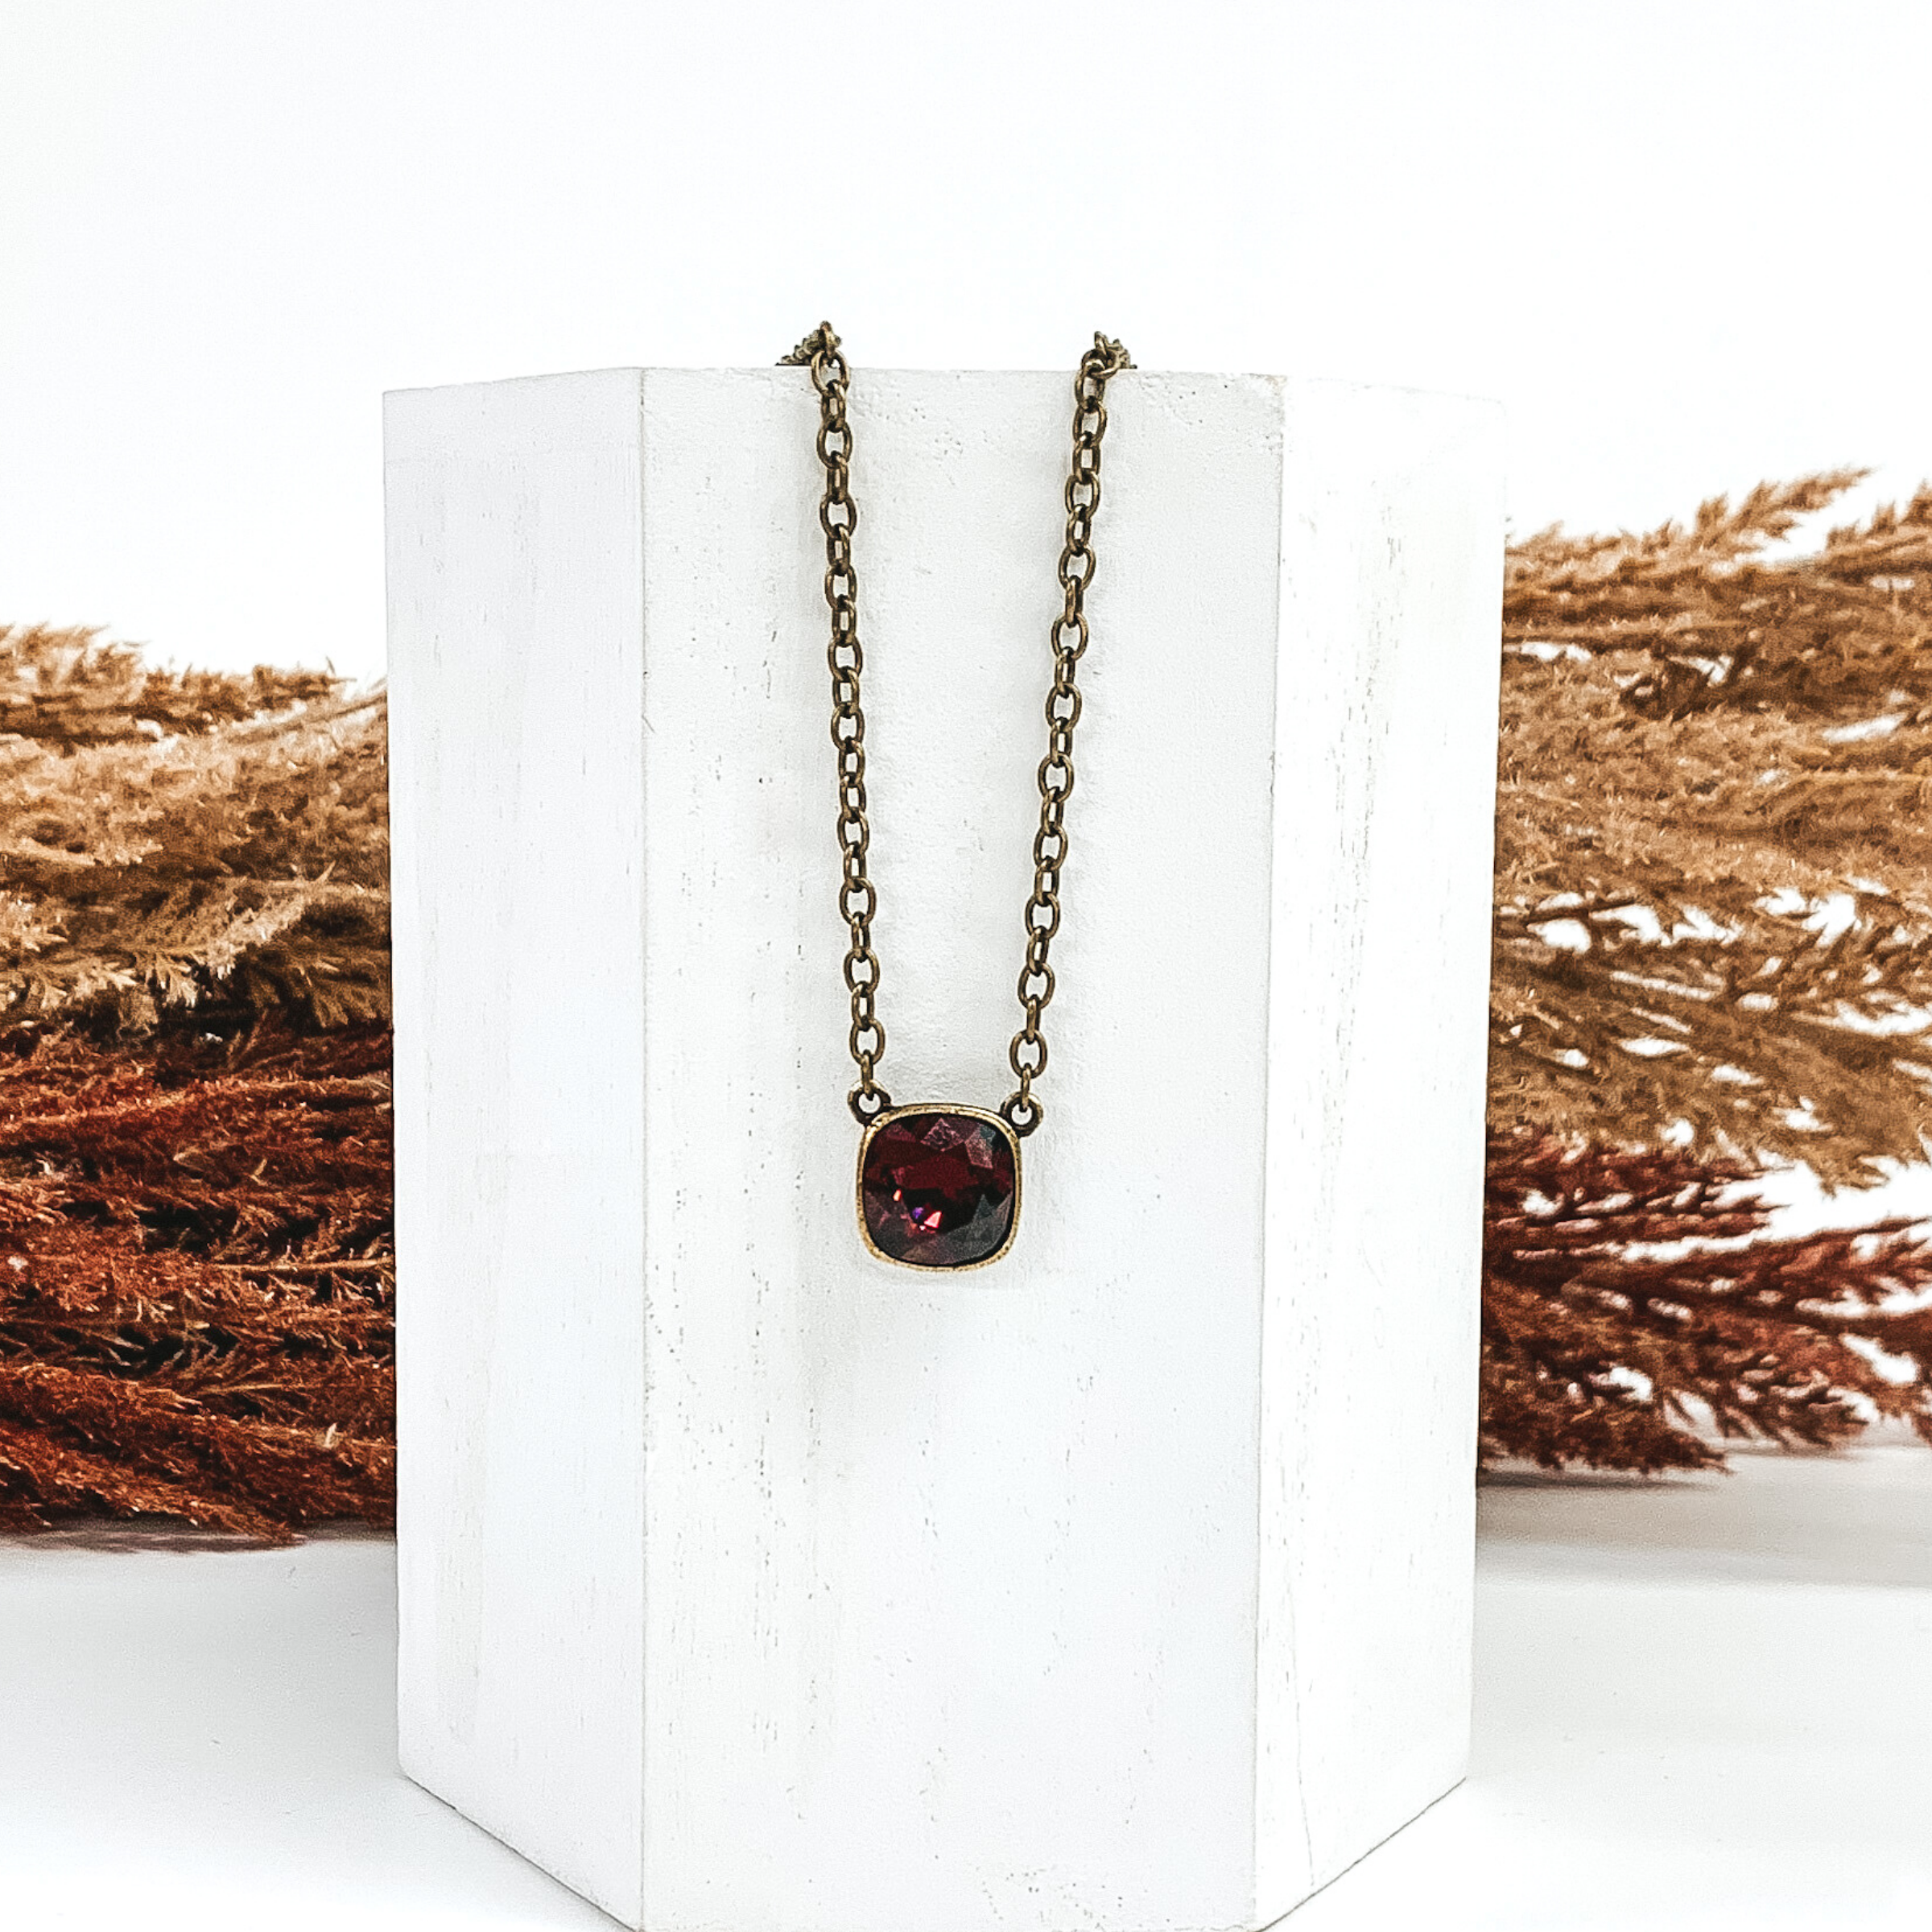 Bronze chained necklace witha square maroon crystal. This necklace is hanging on a white block in front of brown and tan decor